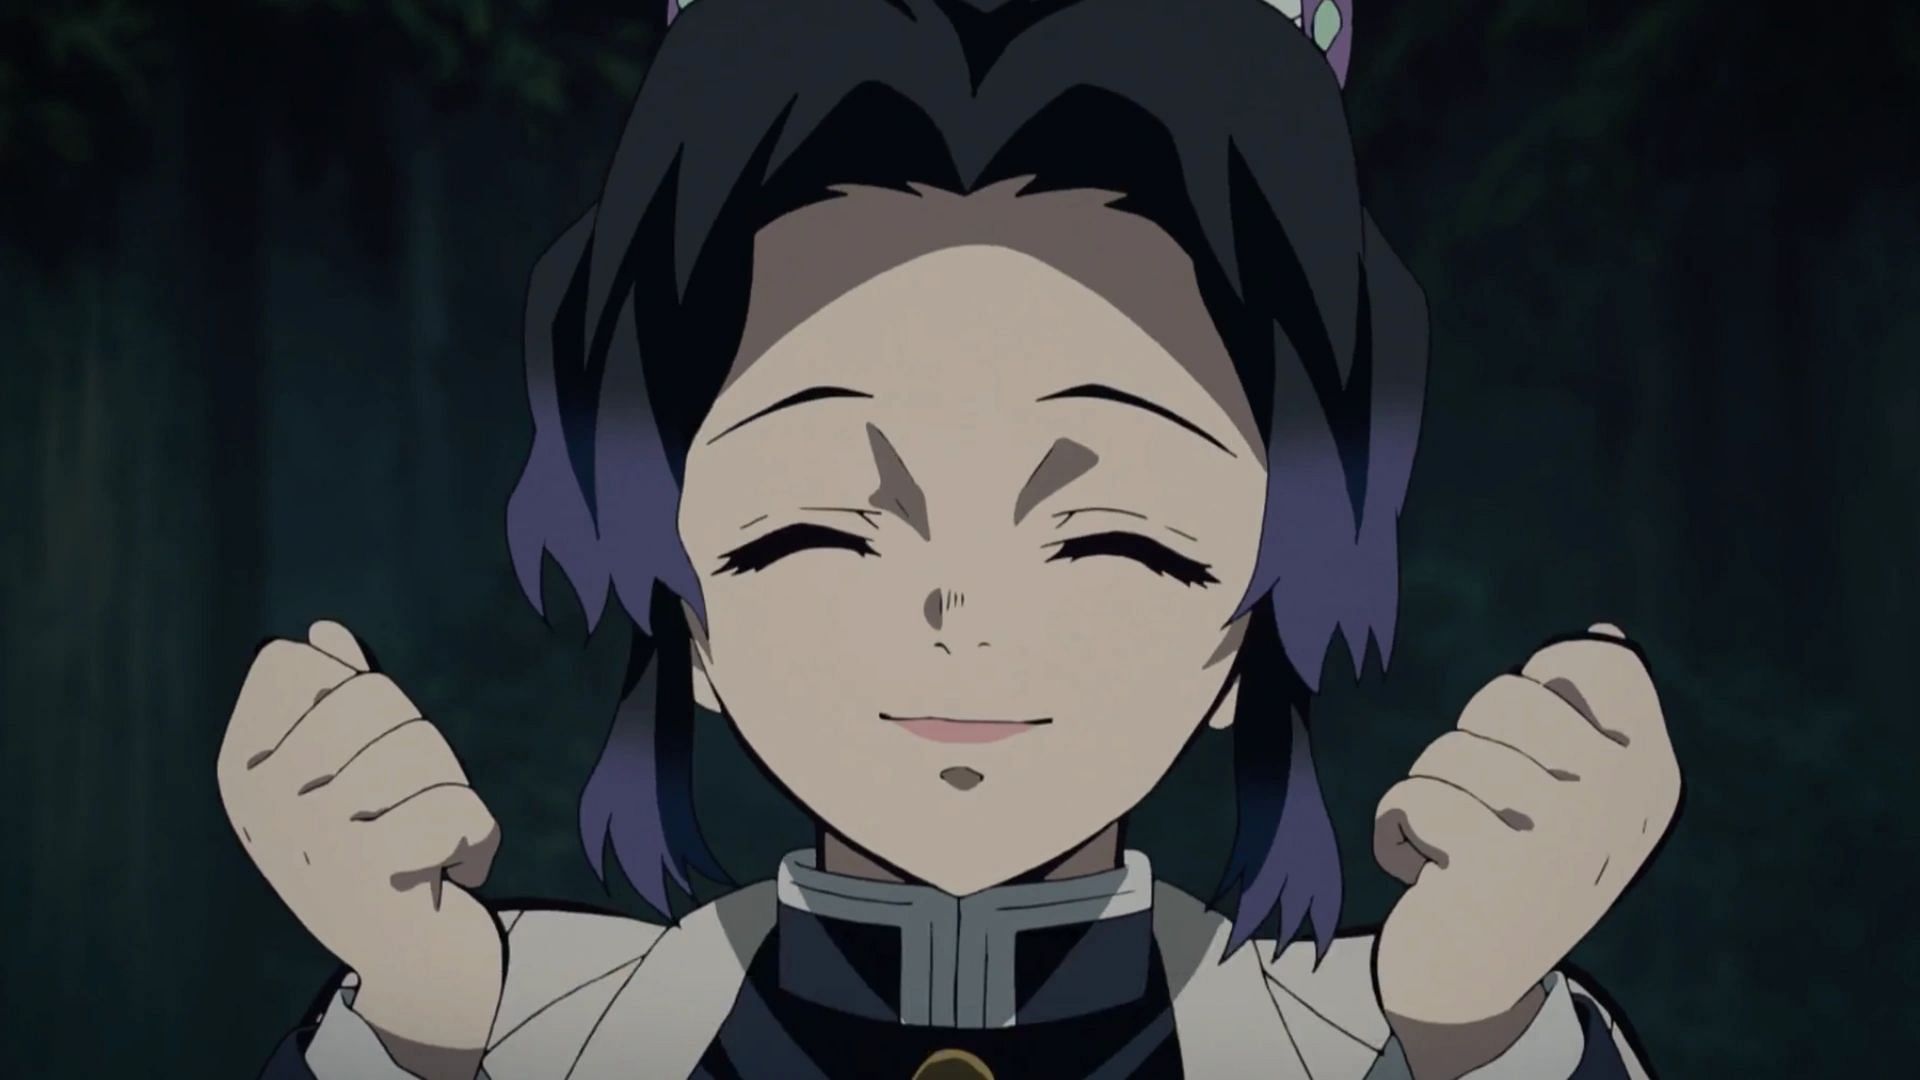 Shinobu Kocho, a character from the anime Demon Slayer, is shown with a joyful smile on her face